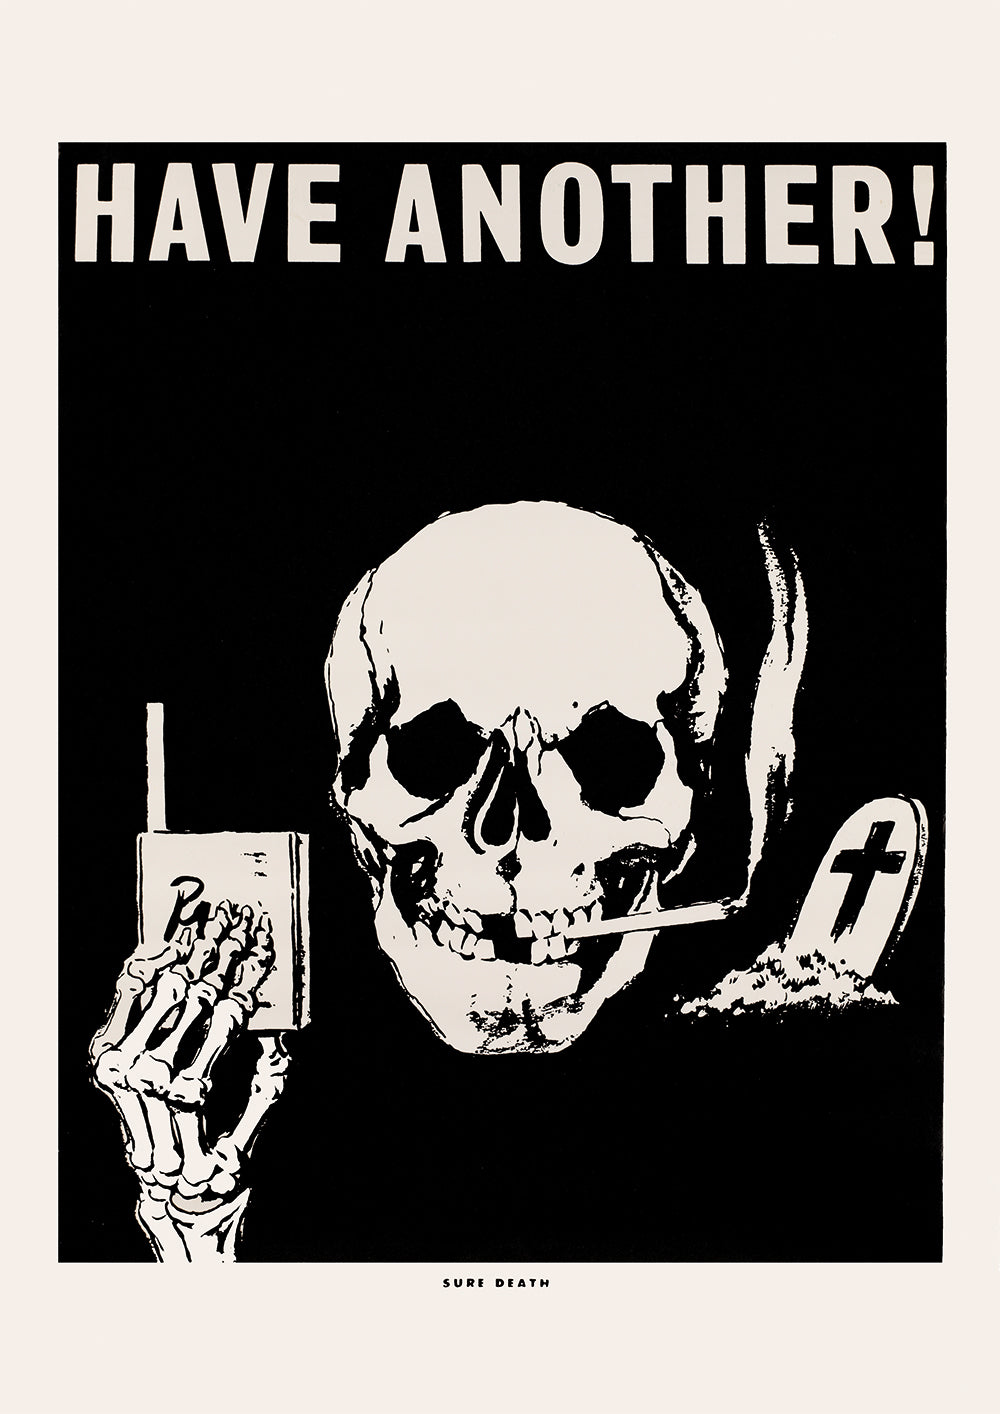 Have another! — American anti-smoking poster